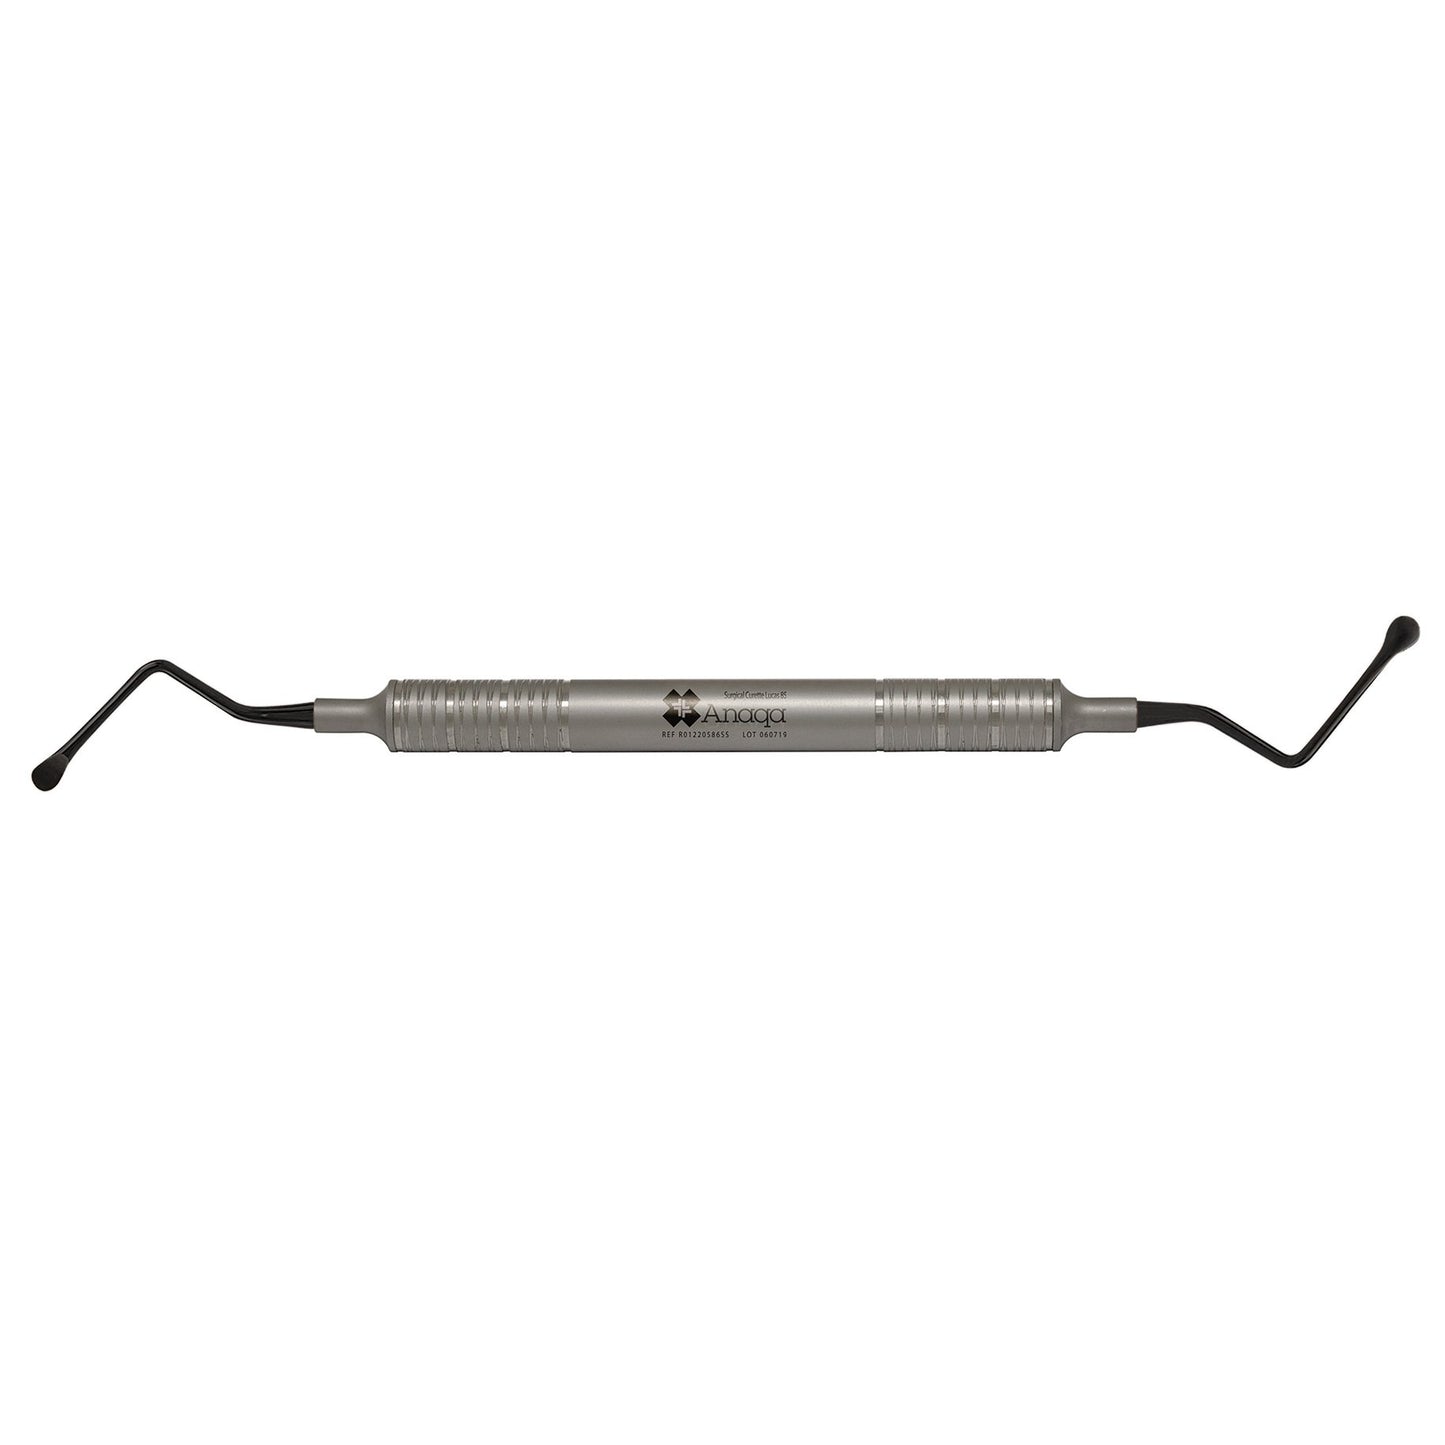 Surgical Curette Lucas 85 9.5mm Stainless Steel 01